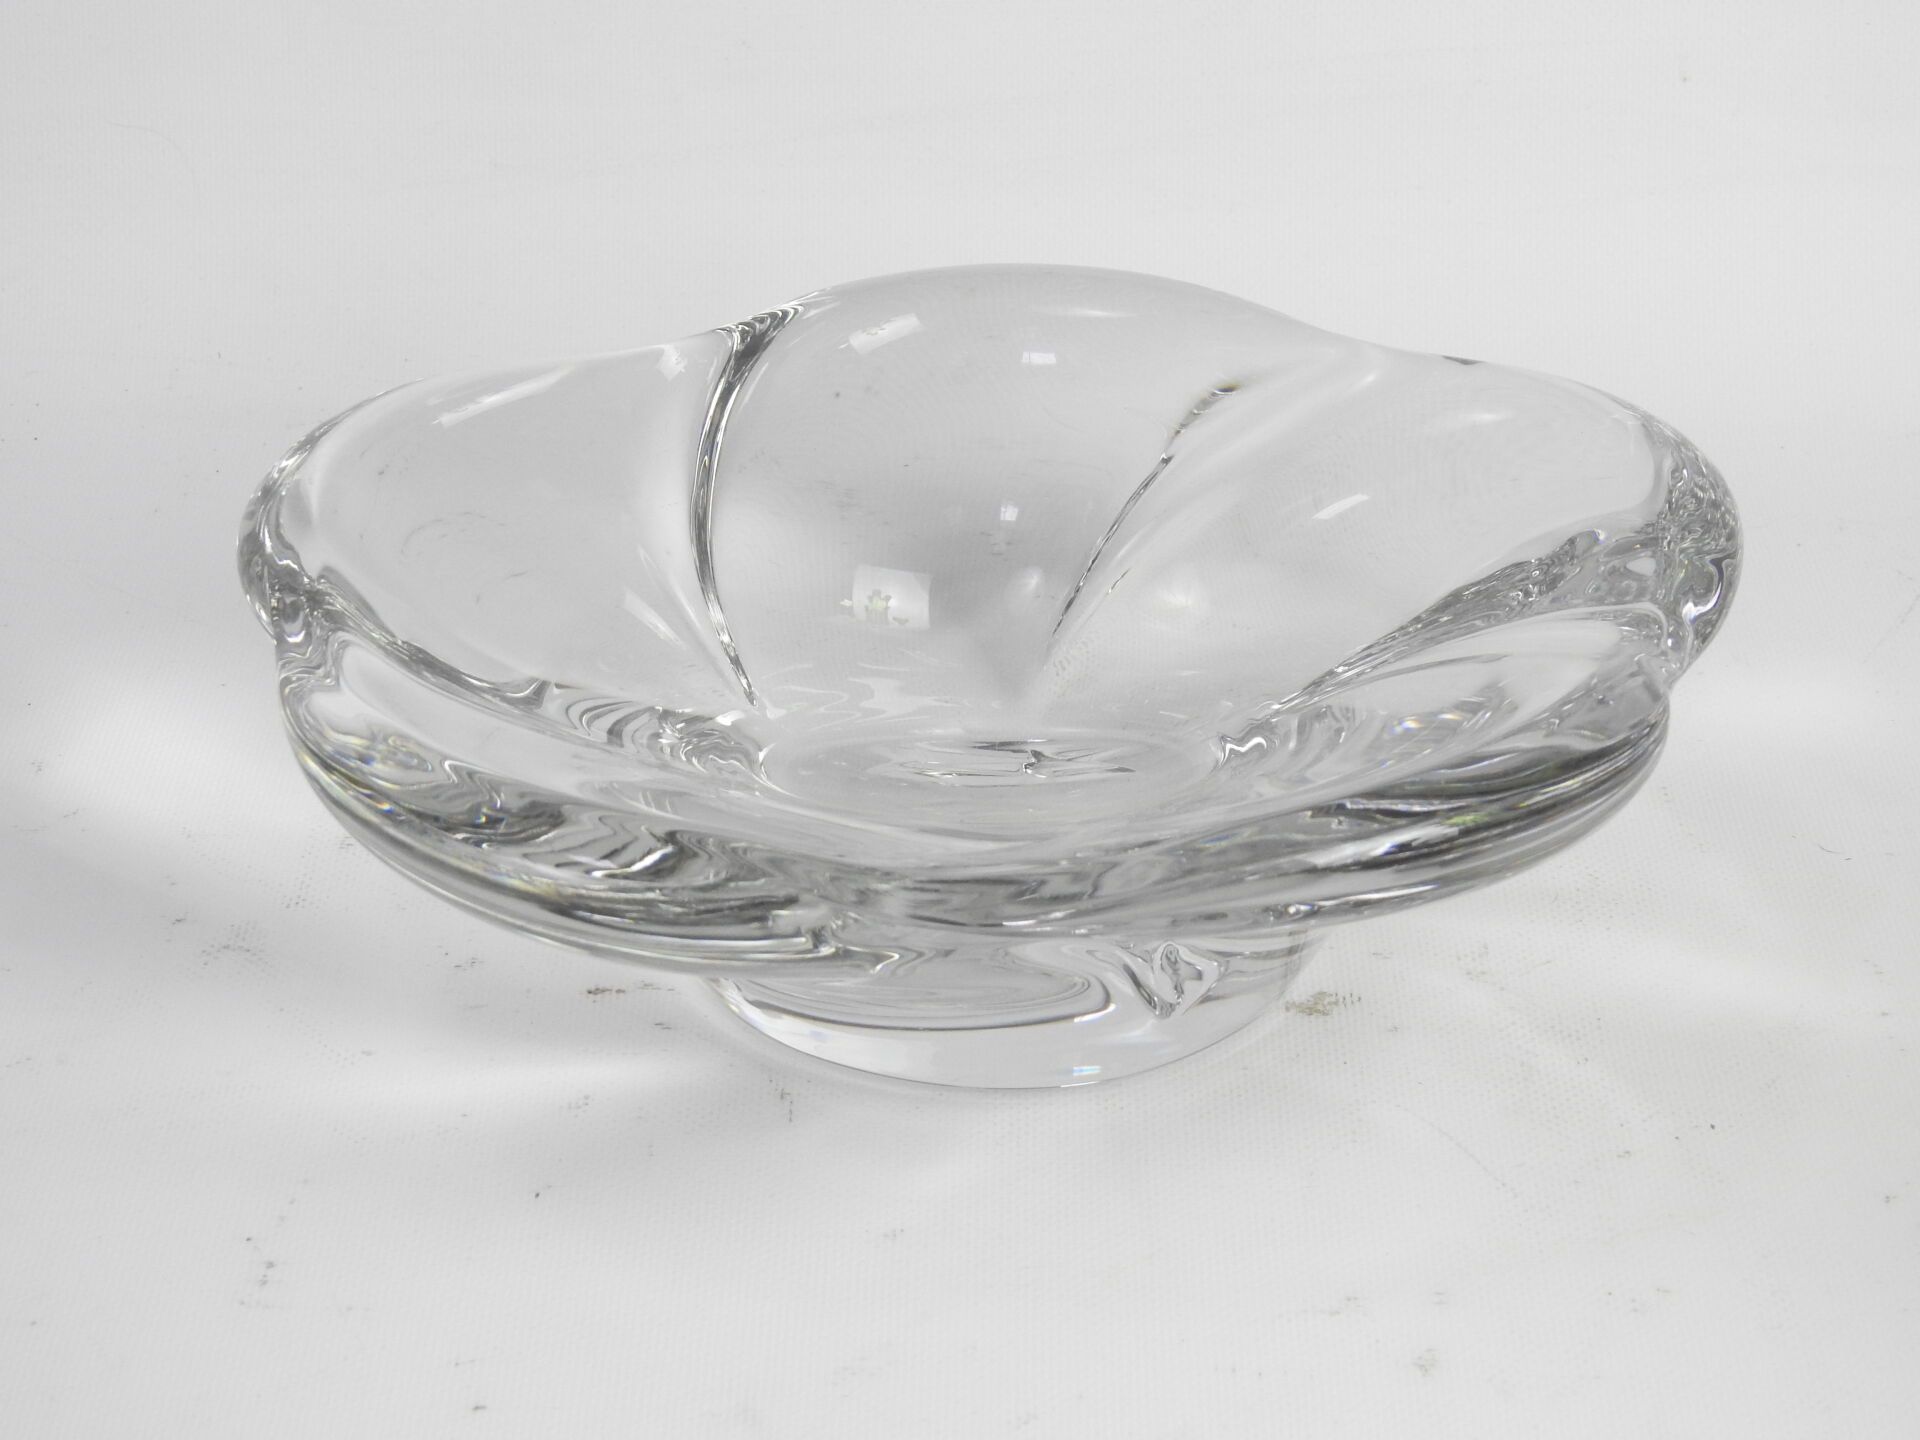 Null DAUM Nancy France : Polylobed cup in colorless crystal. Signed. 9 x 27 cm